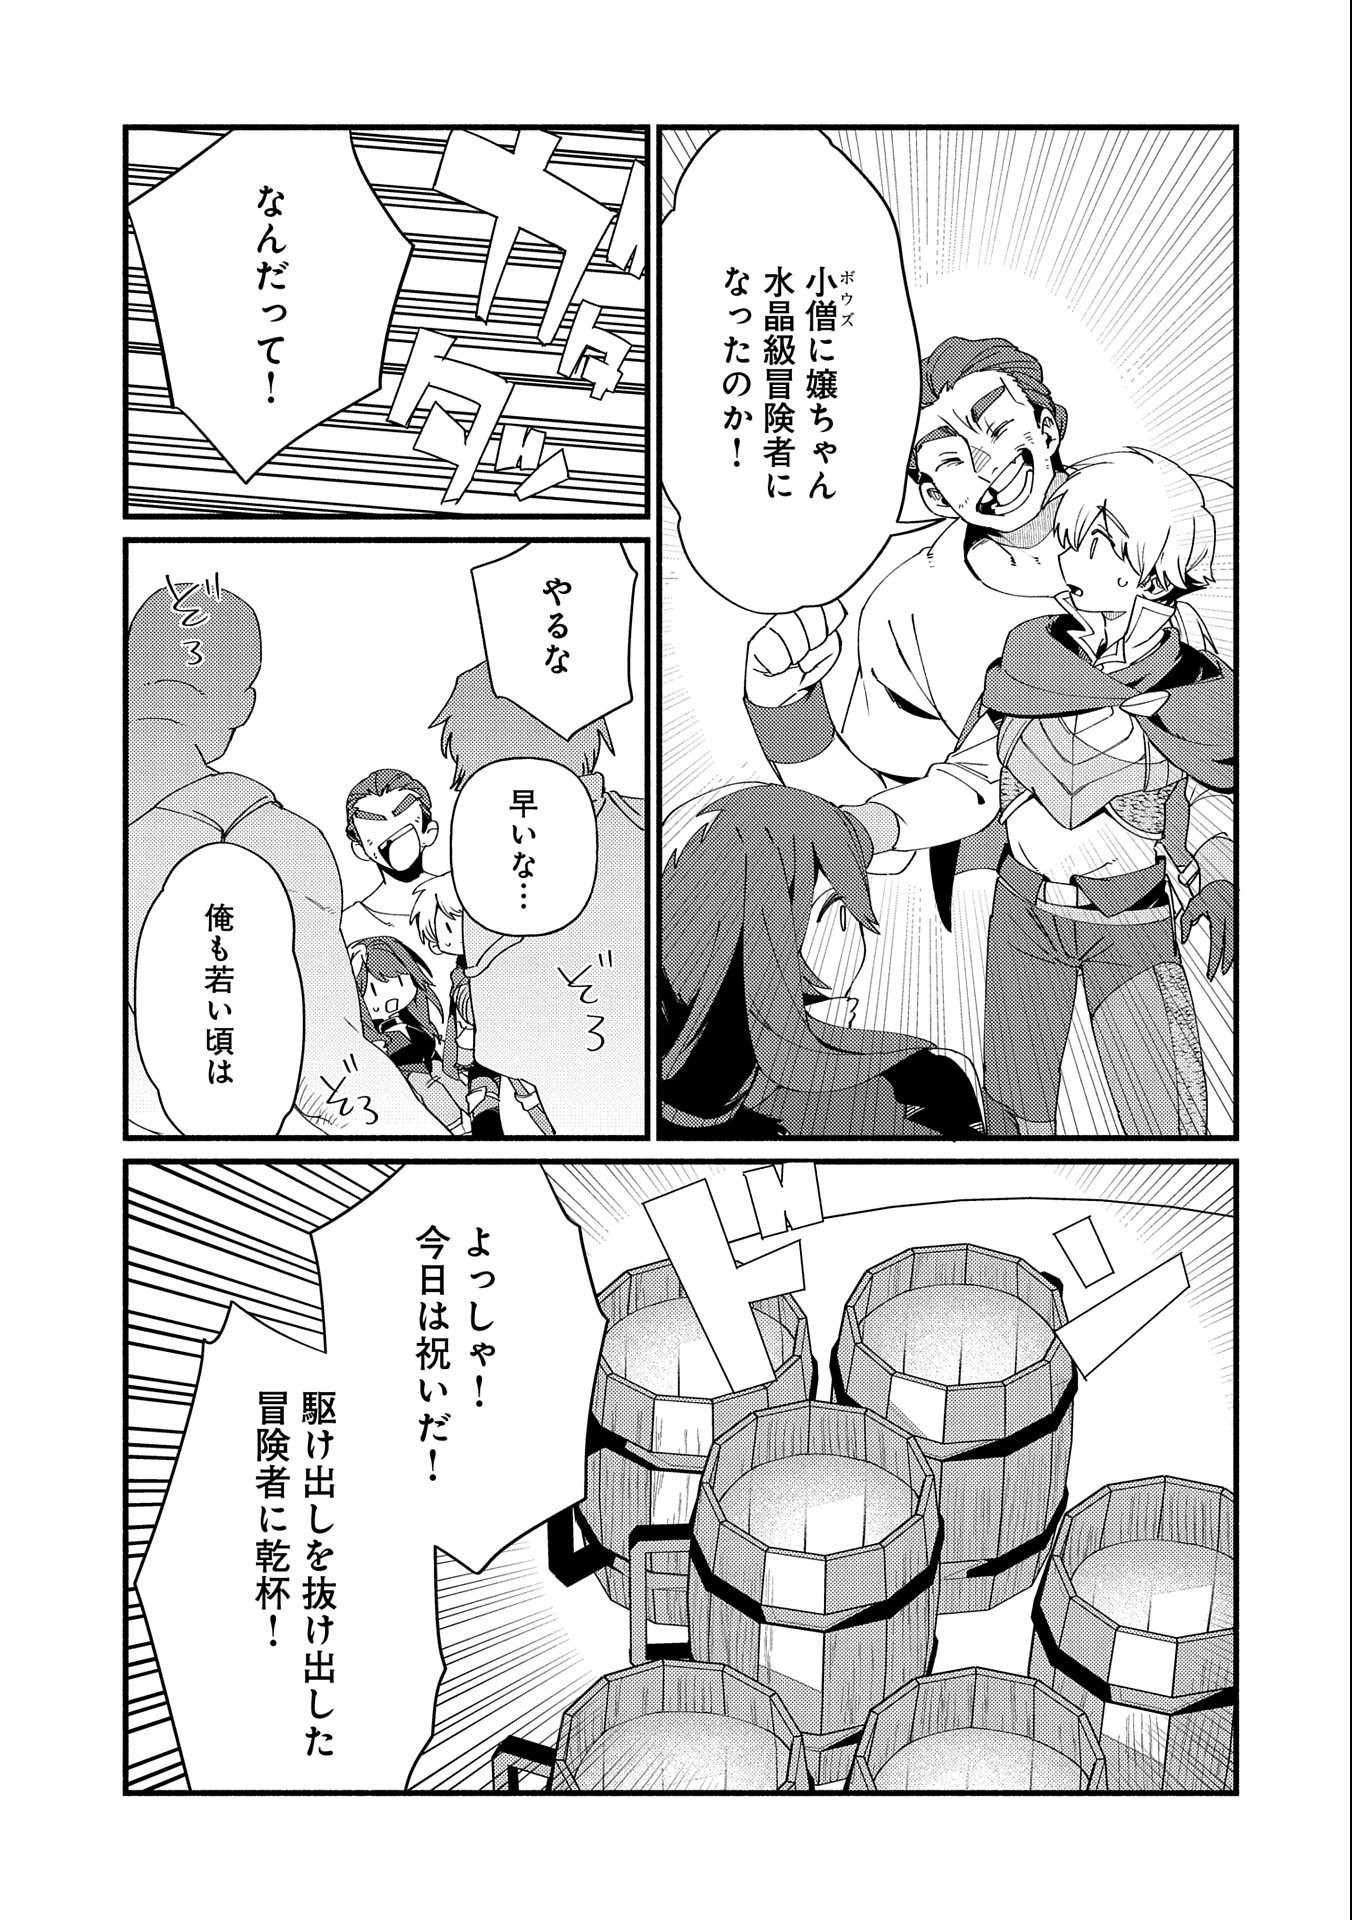 Nord’s Adventure 第9.2話 - Page 3